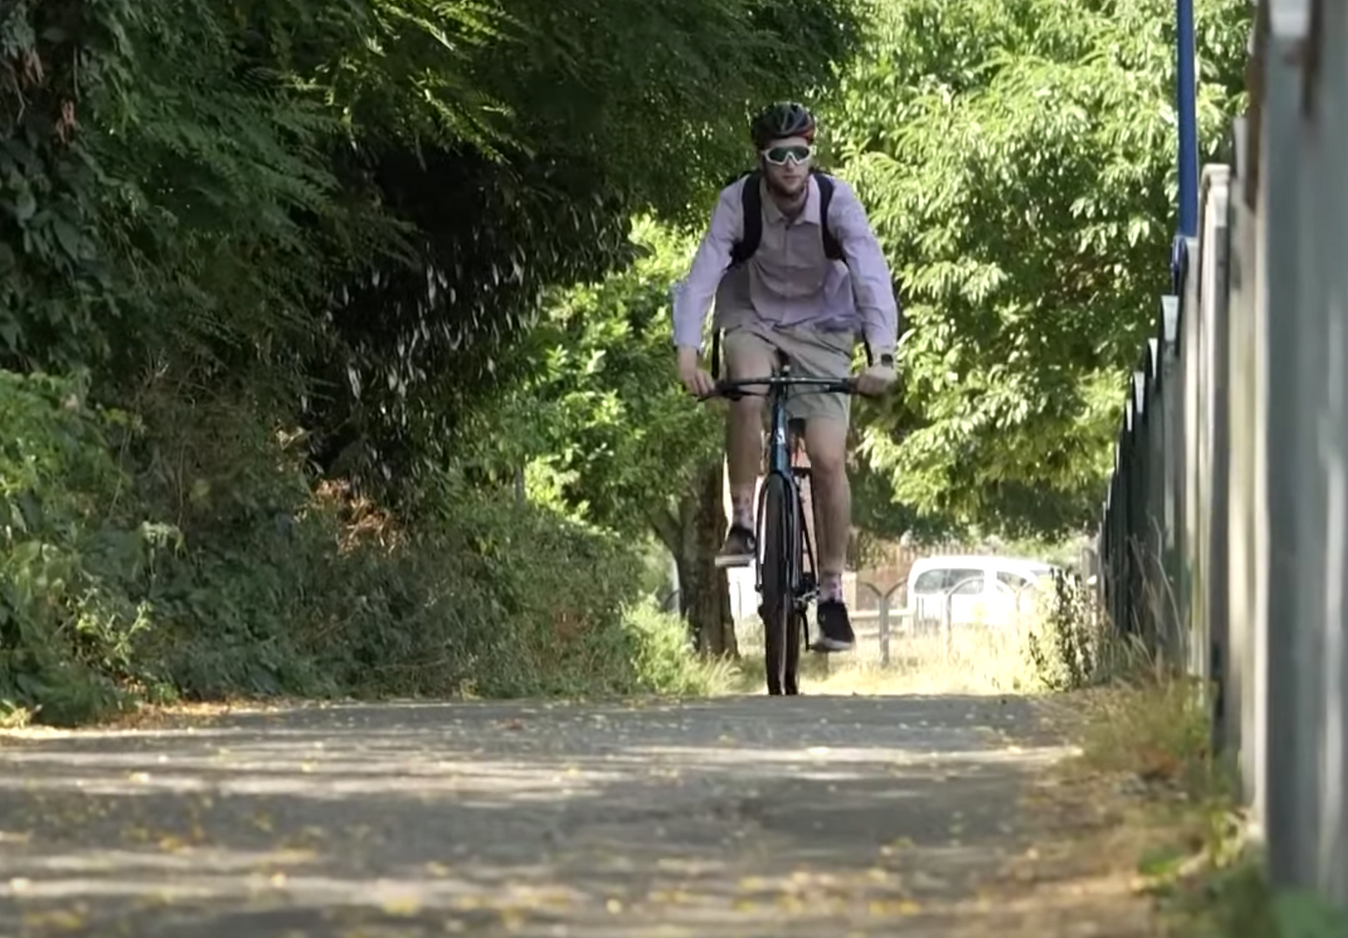 Commuting by bike doesn't have to be a solo endeavour